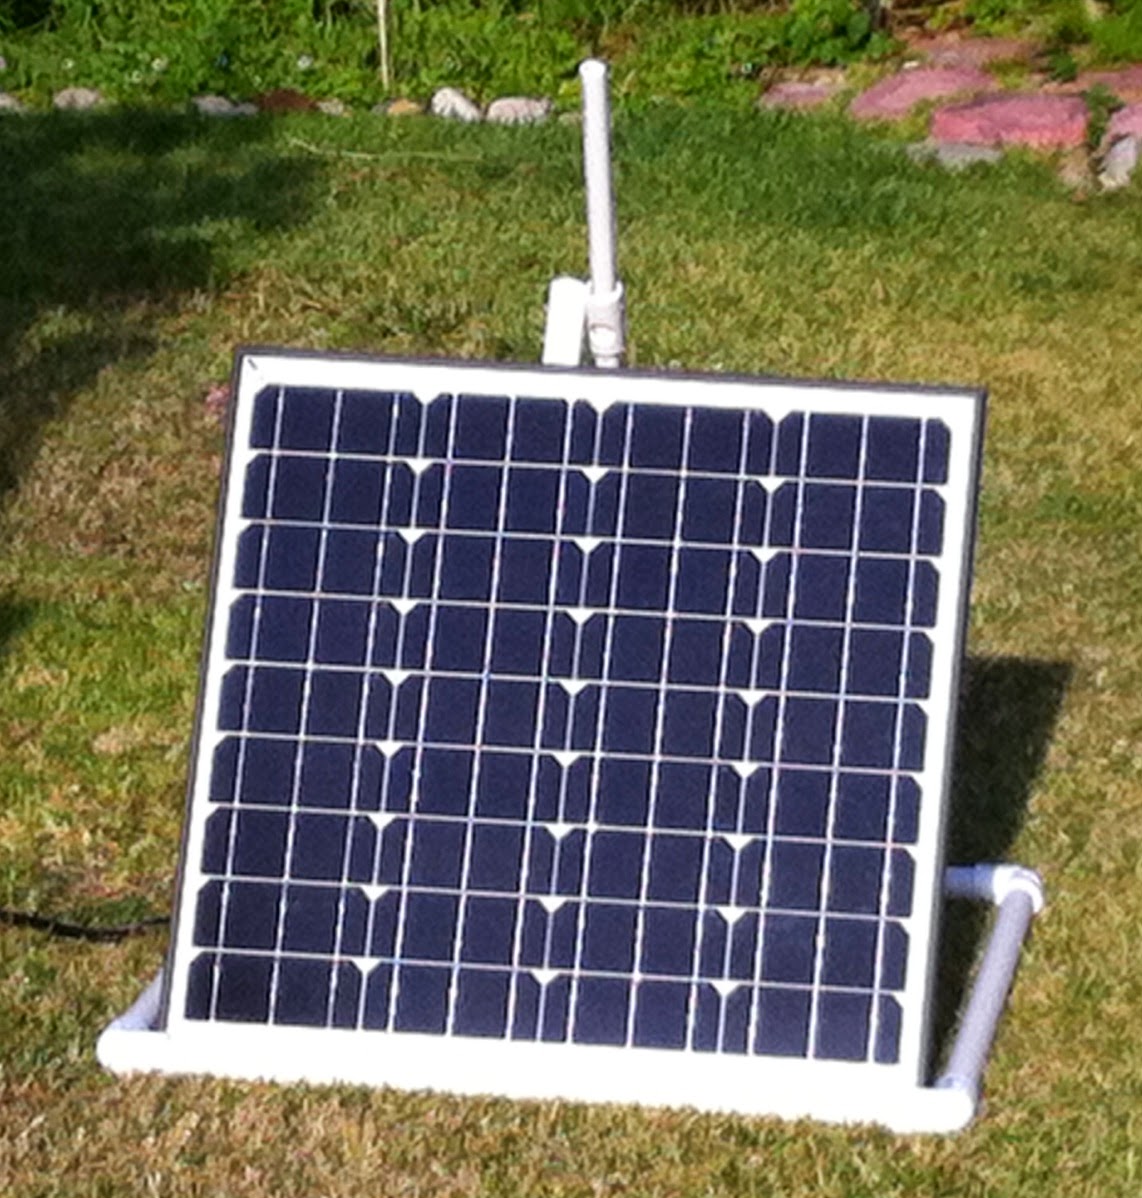 WA6PZB More Power Node Solar Panel Tests